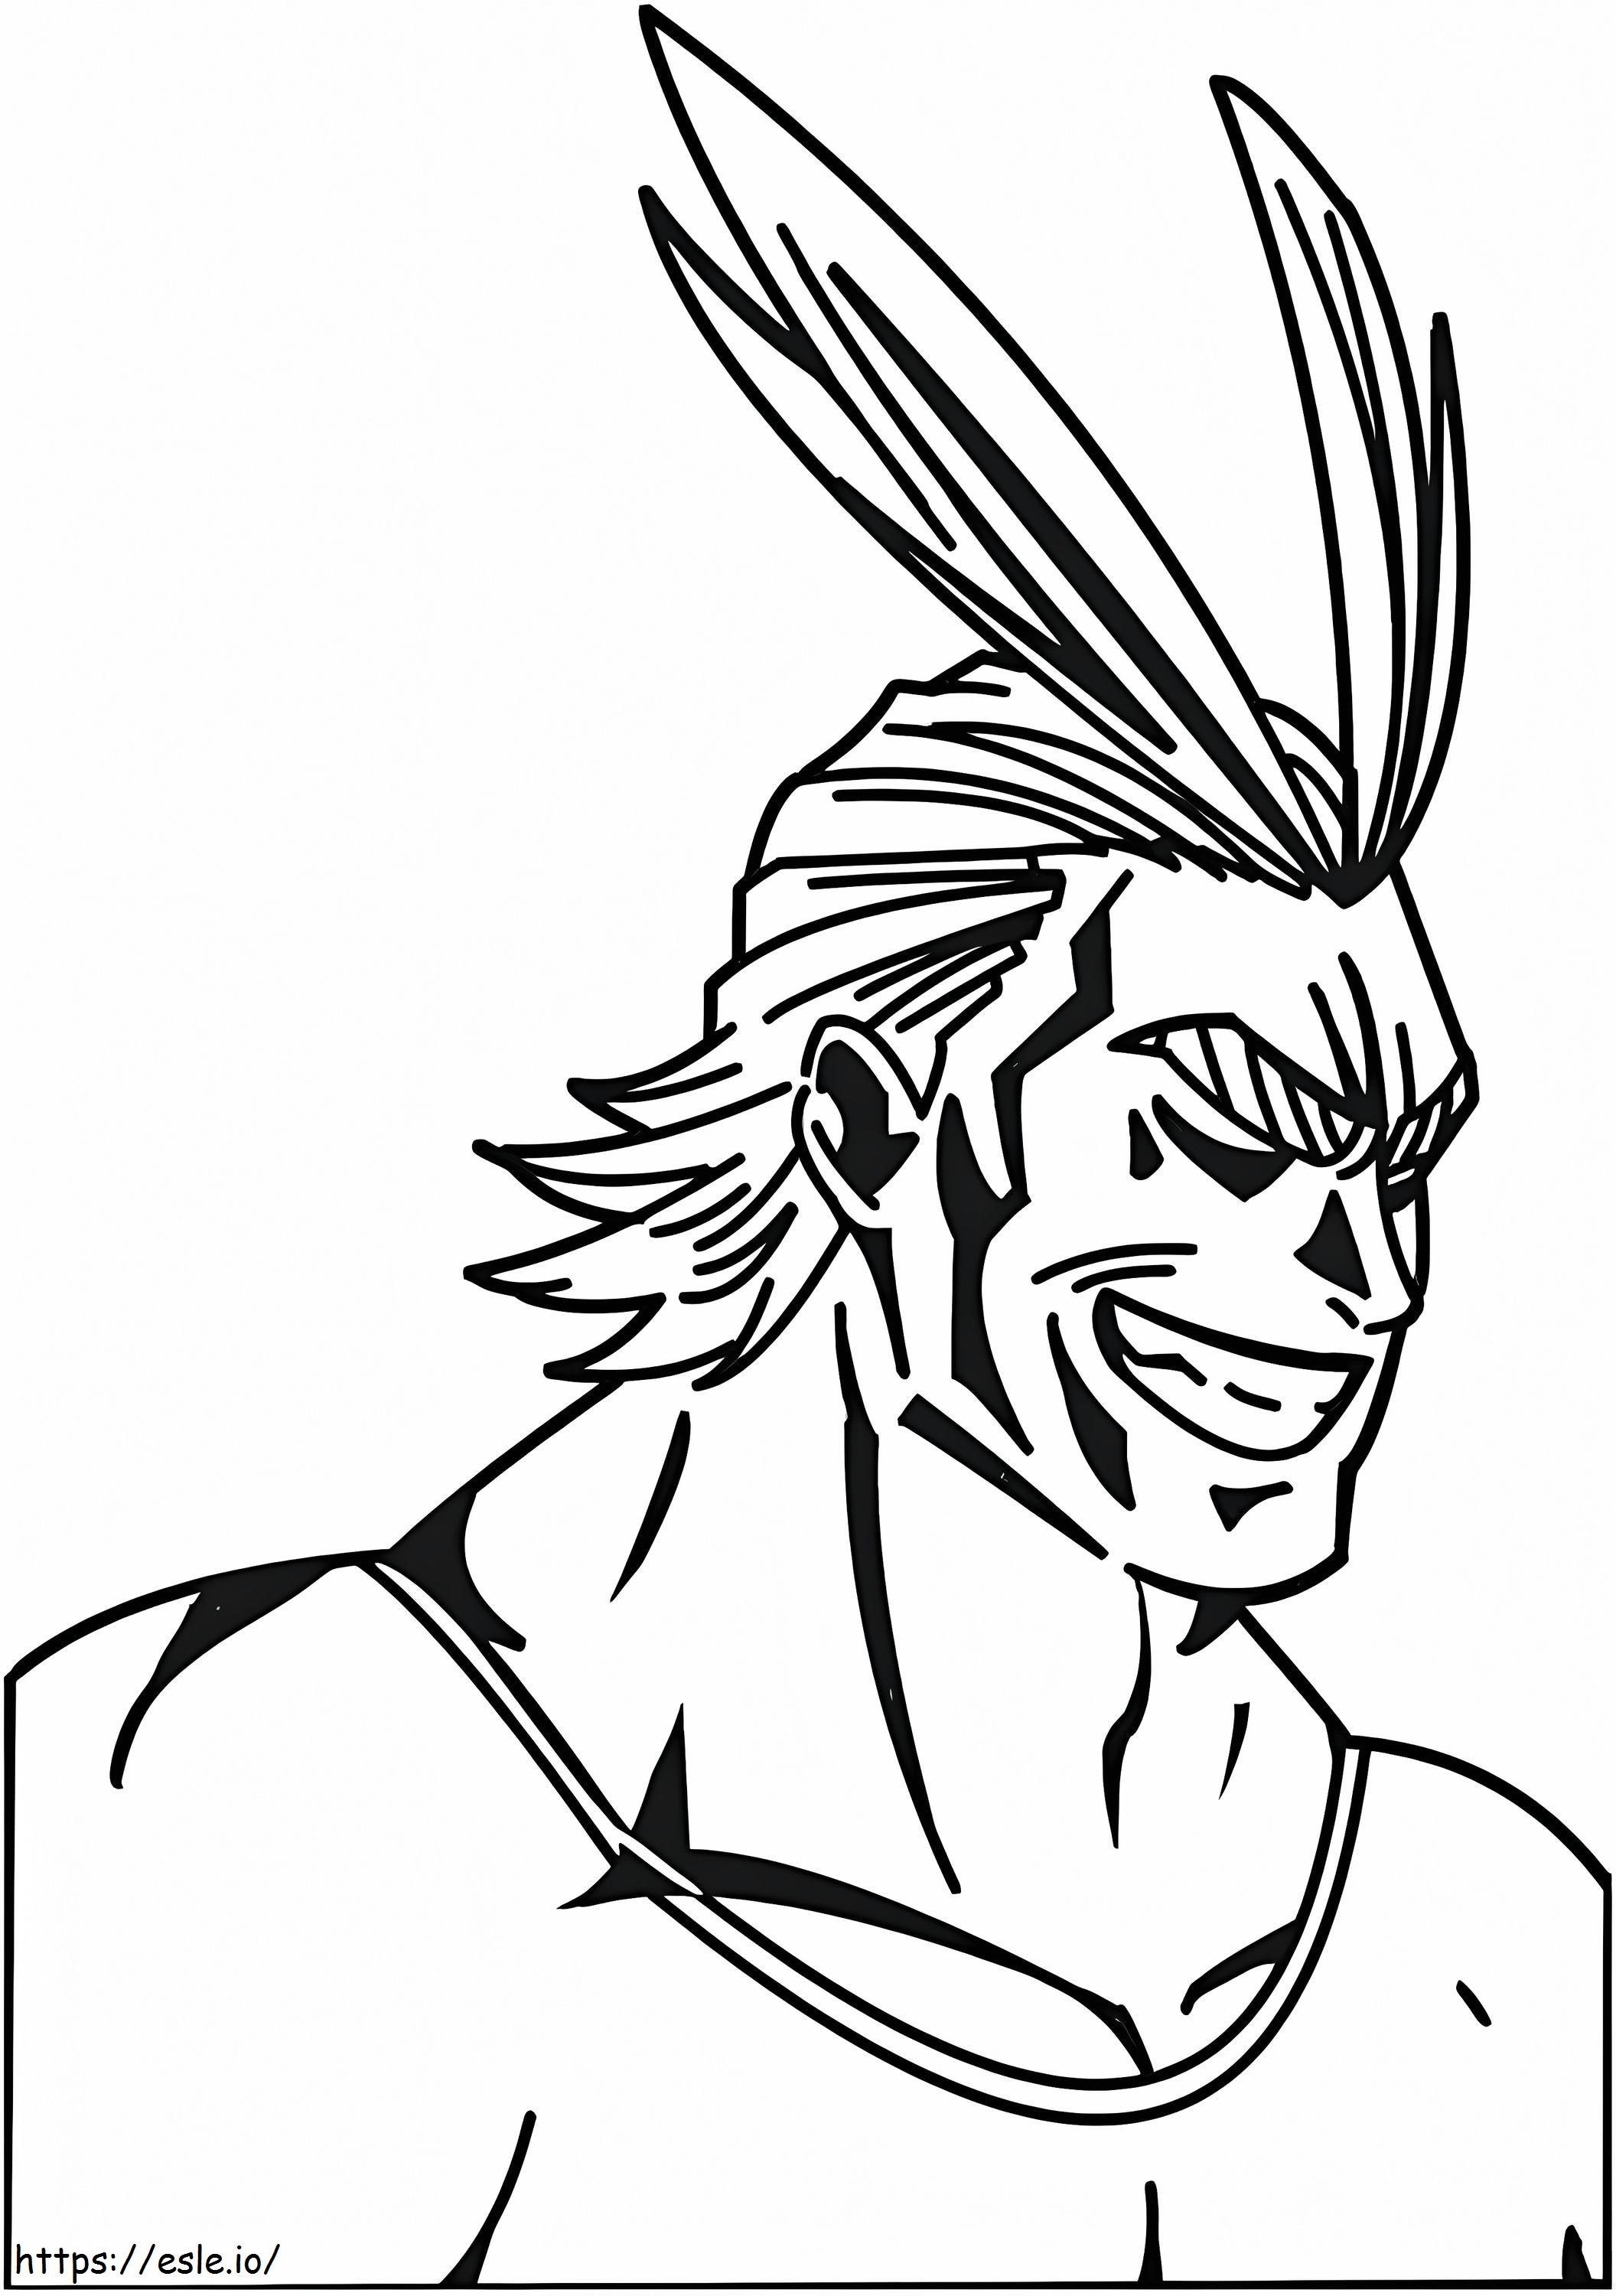 Printable All Might coloring page